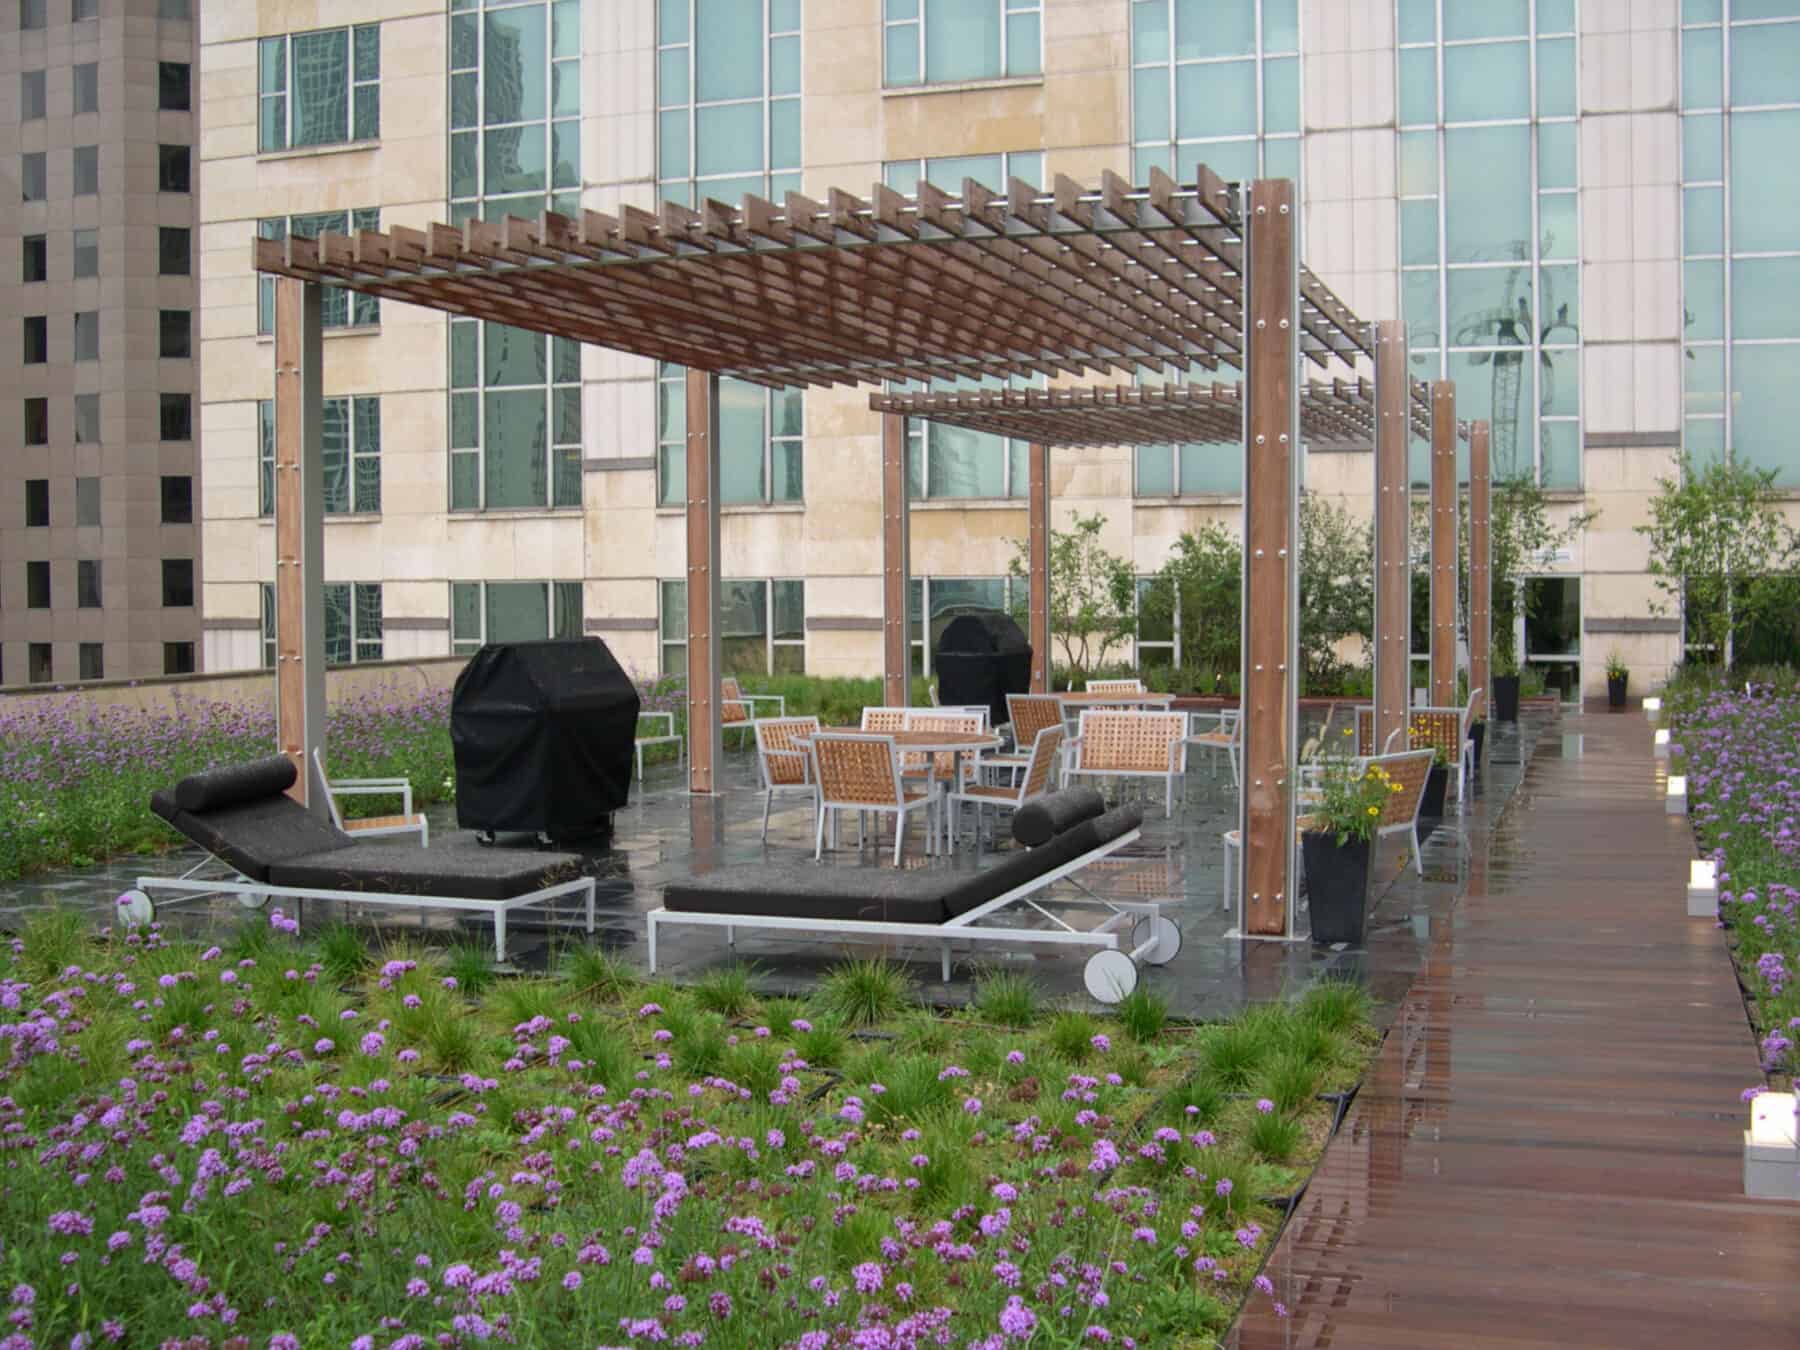 Custom Fabrication of Architectural Stainless Steel Metal and Ipe Wood Rooftop Pergola from Construction Specialty Projects by Commercial Builder & General Contractor Structural Enterprises